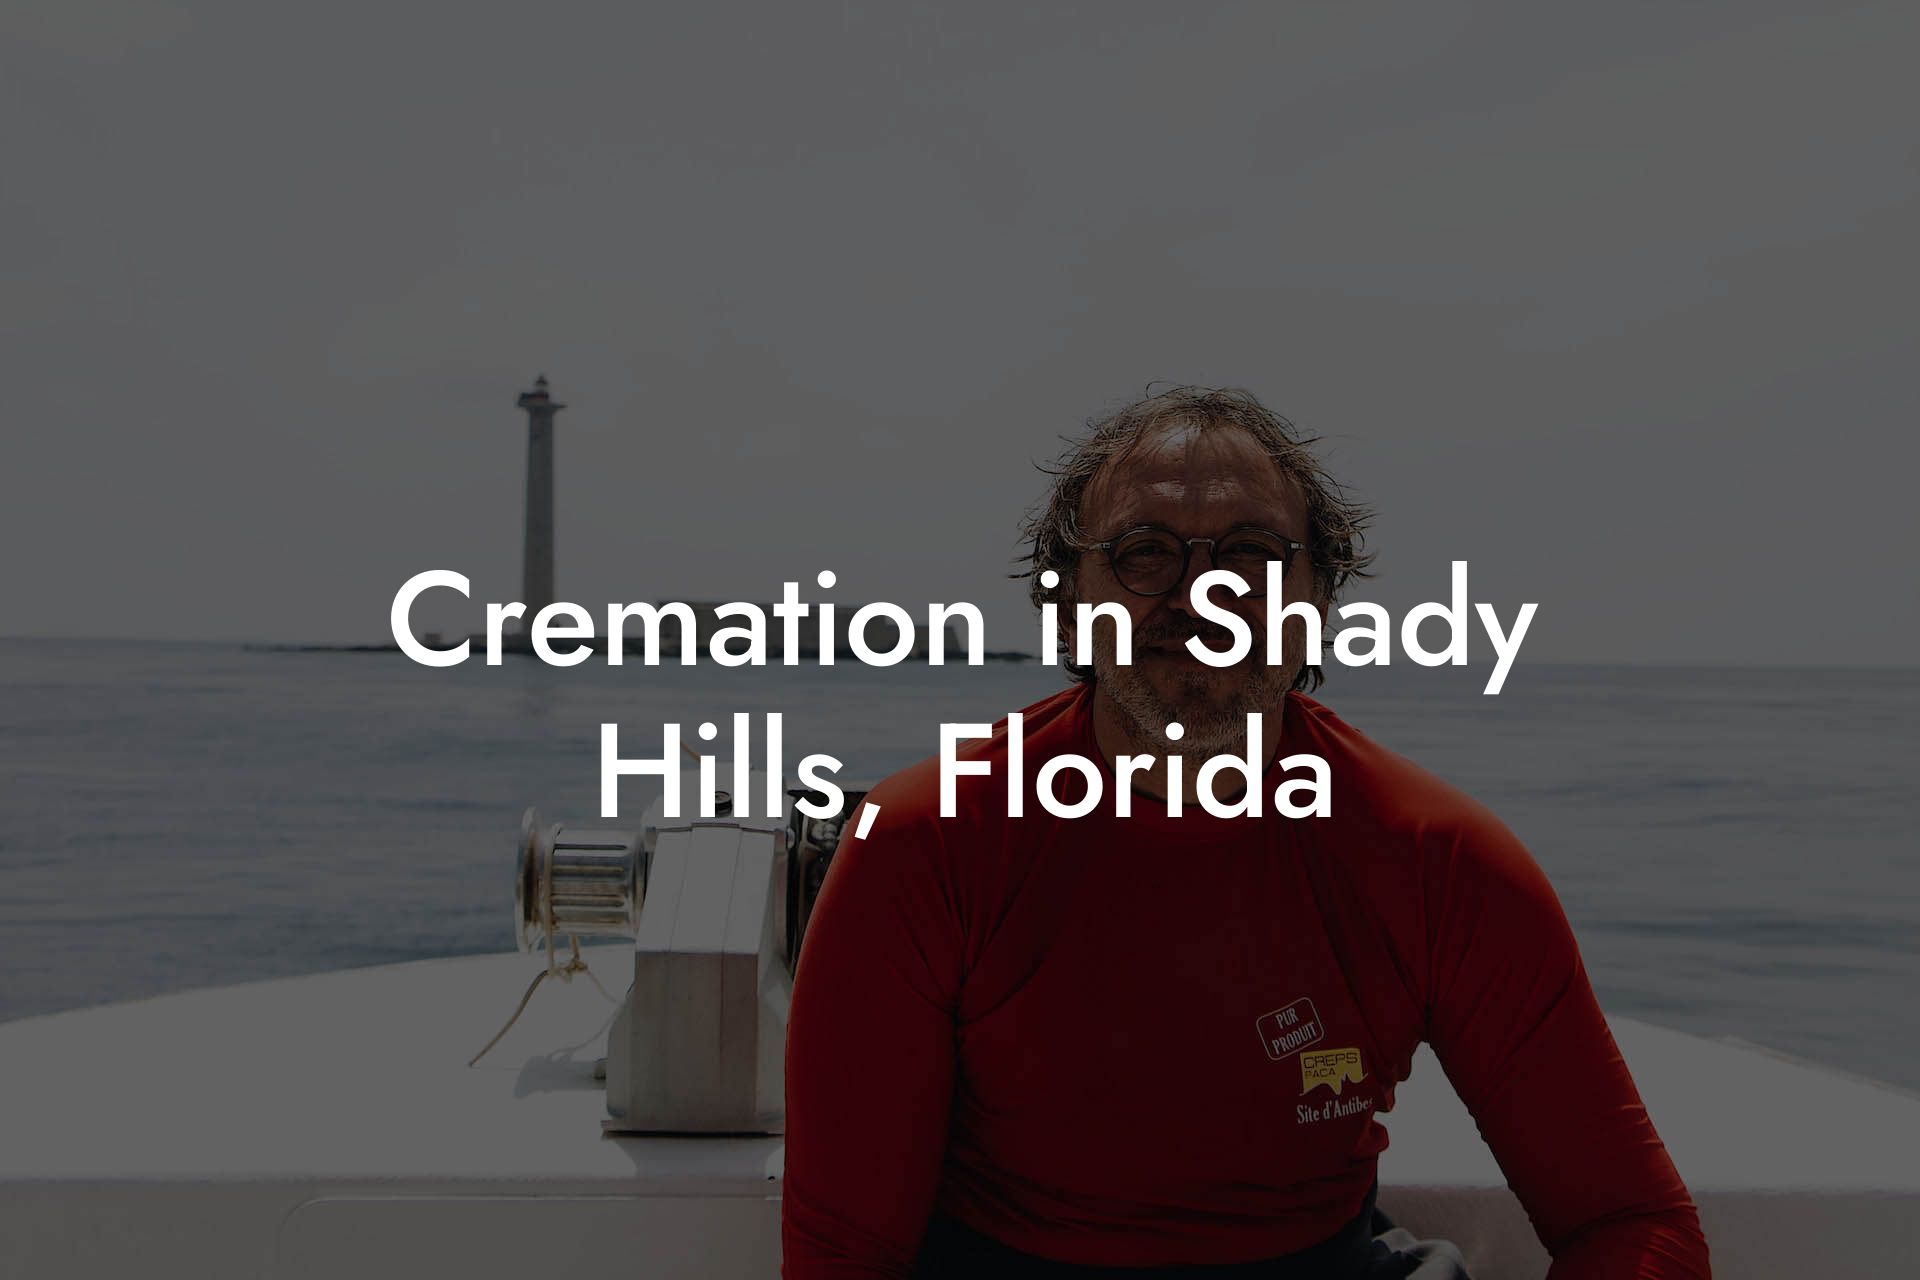 Cremation in Shady Hills, Florida